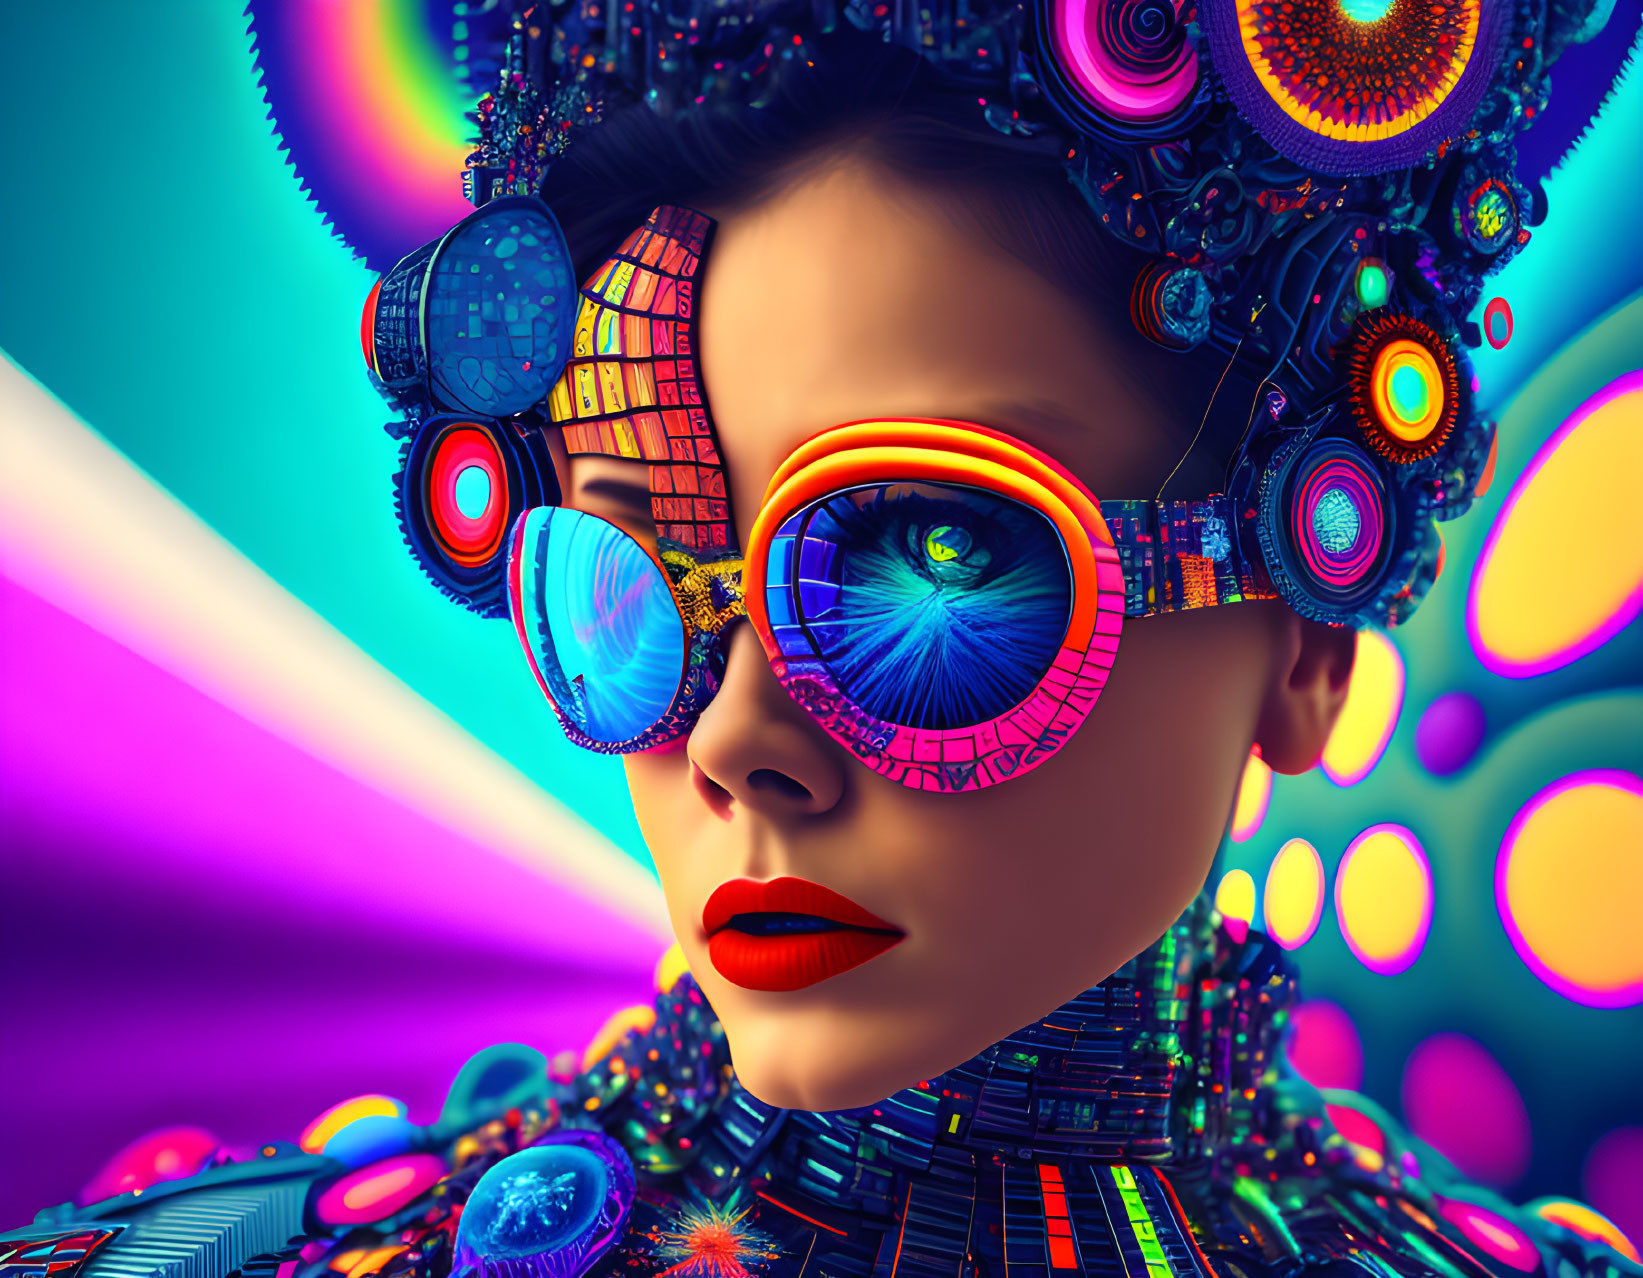 Colorful digital art of woman with futuristic glasses and headgear in neon-lit setting